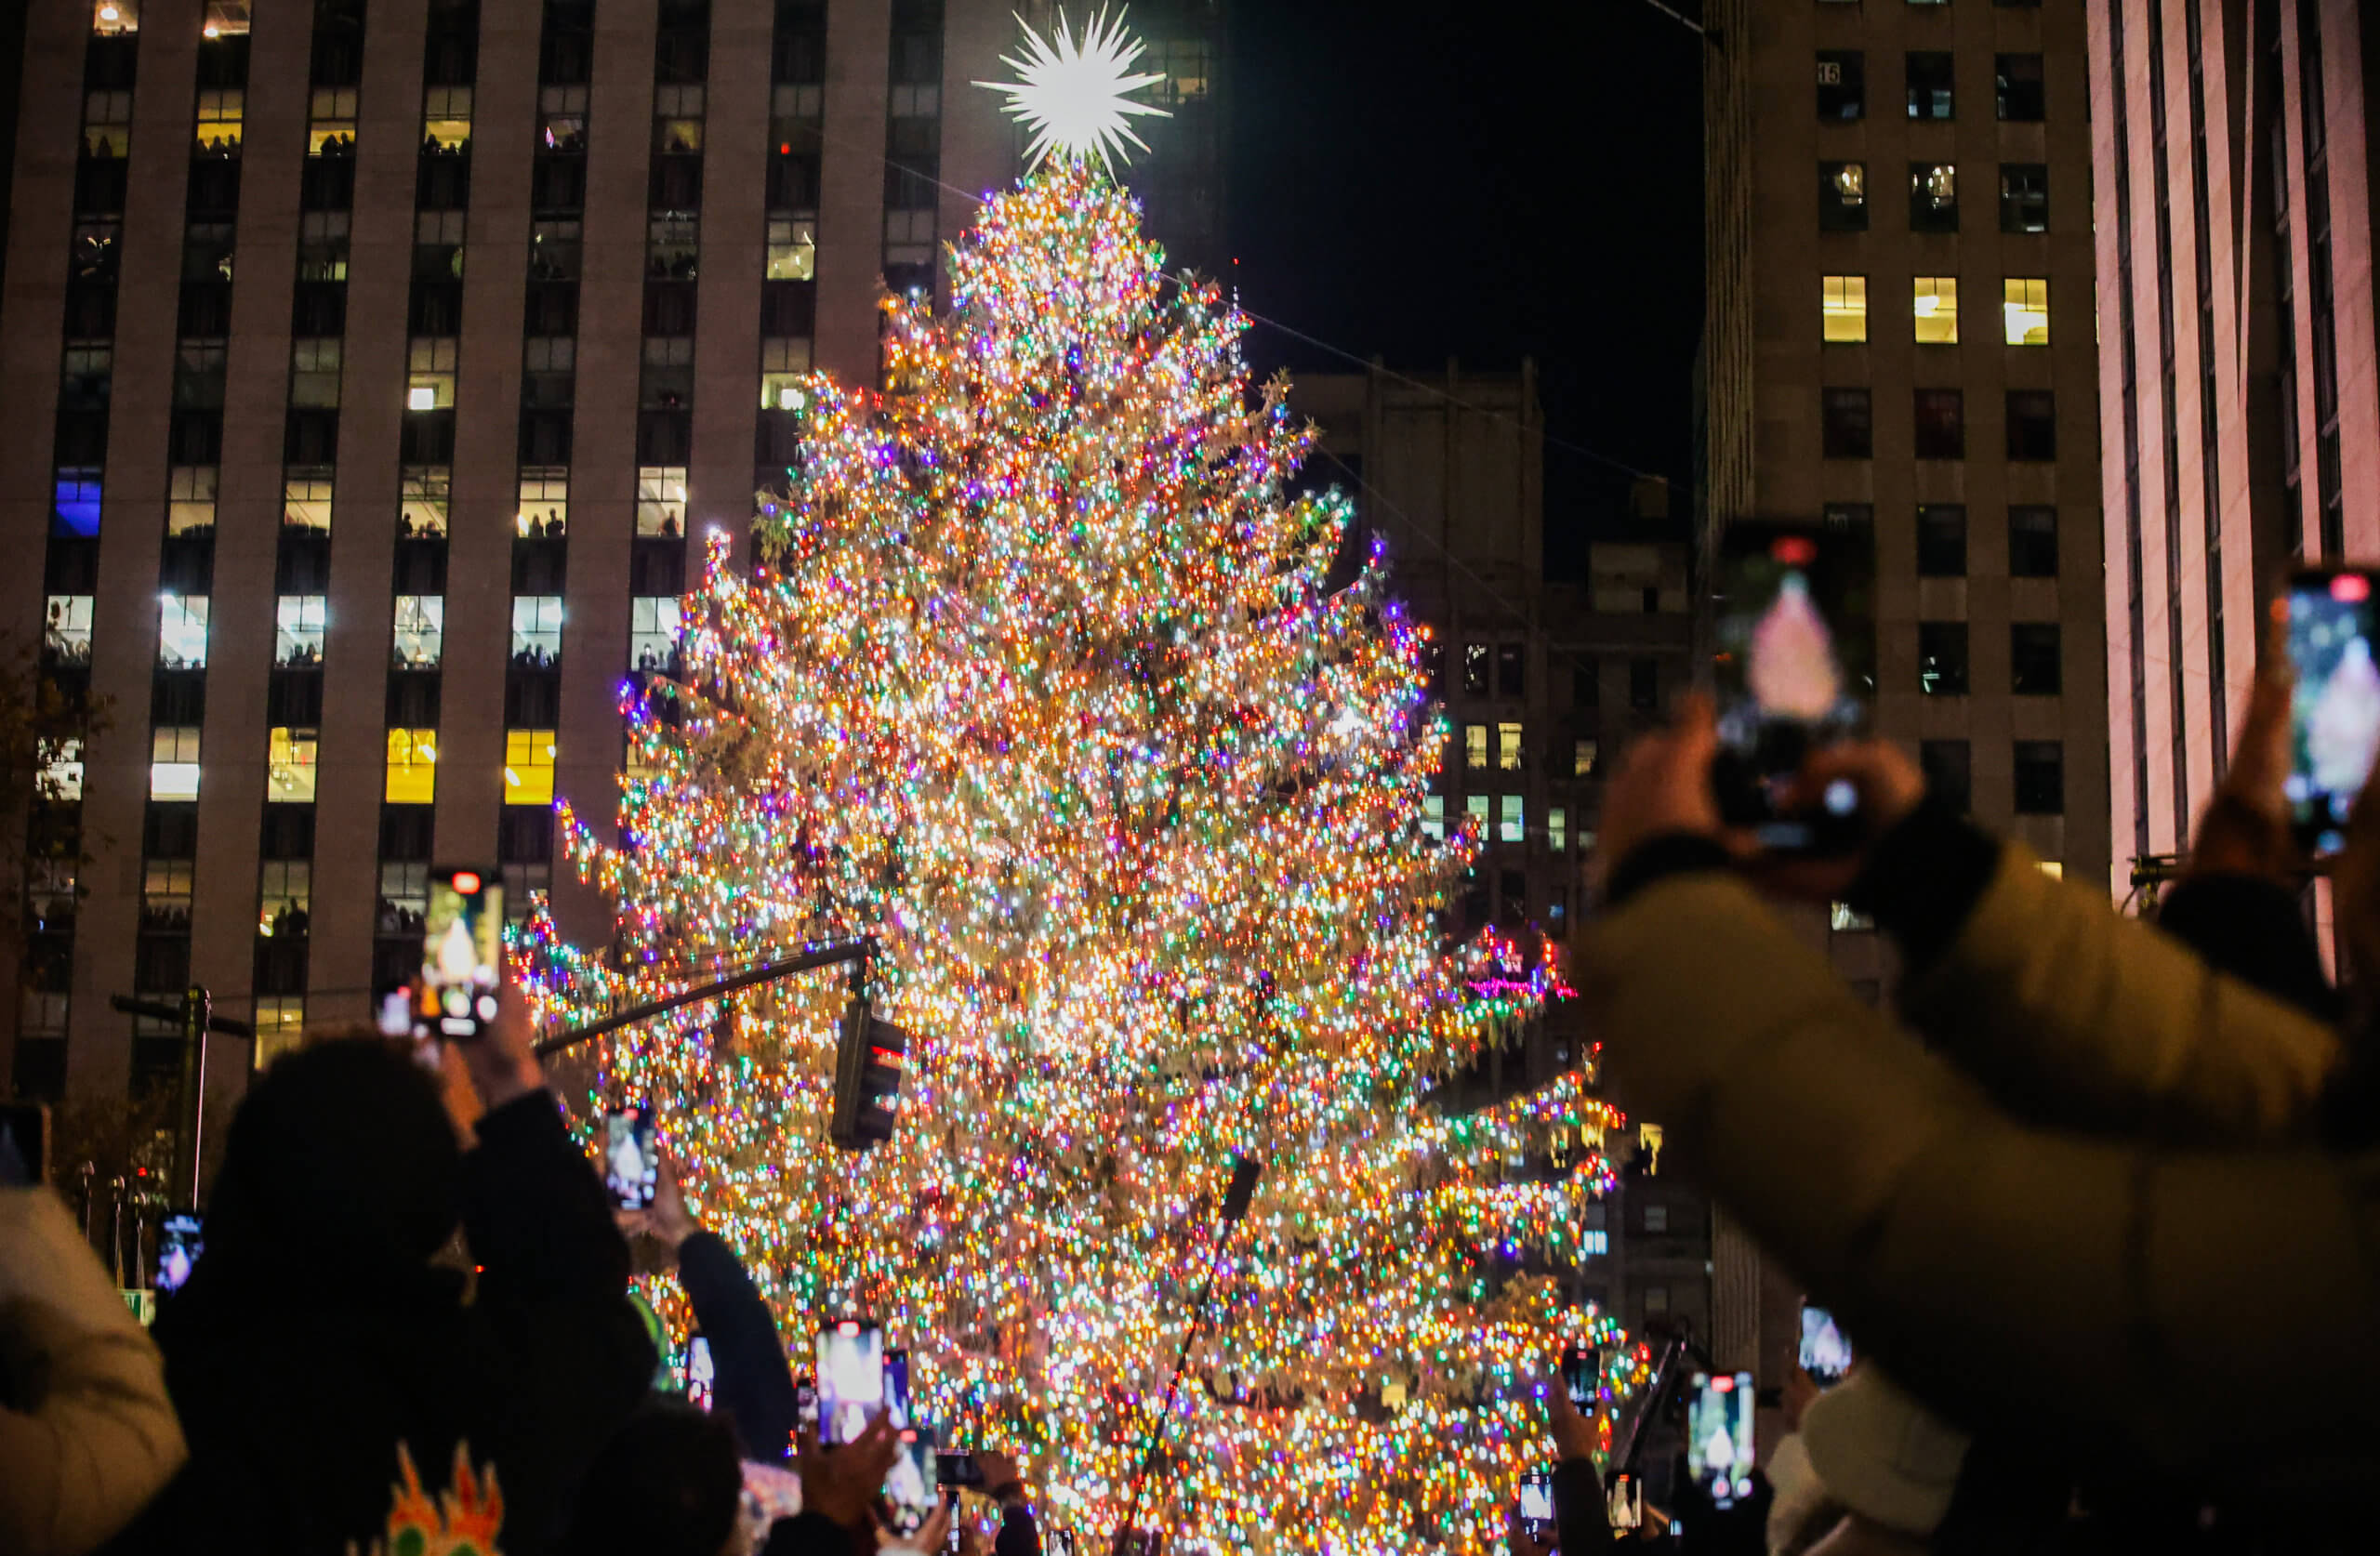 SEE IT: Rockefeller Center lights up famous Christmas Tree